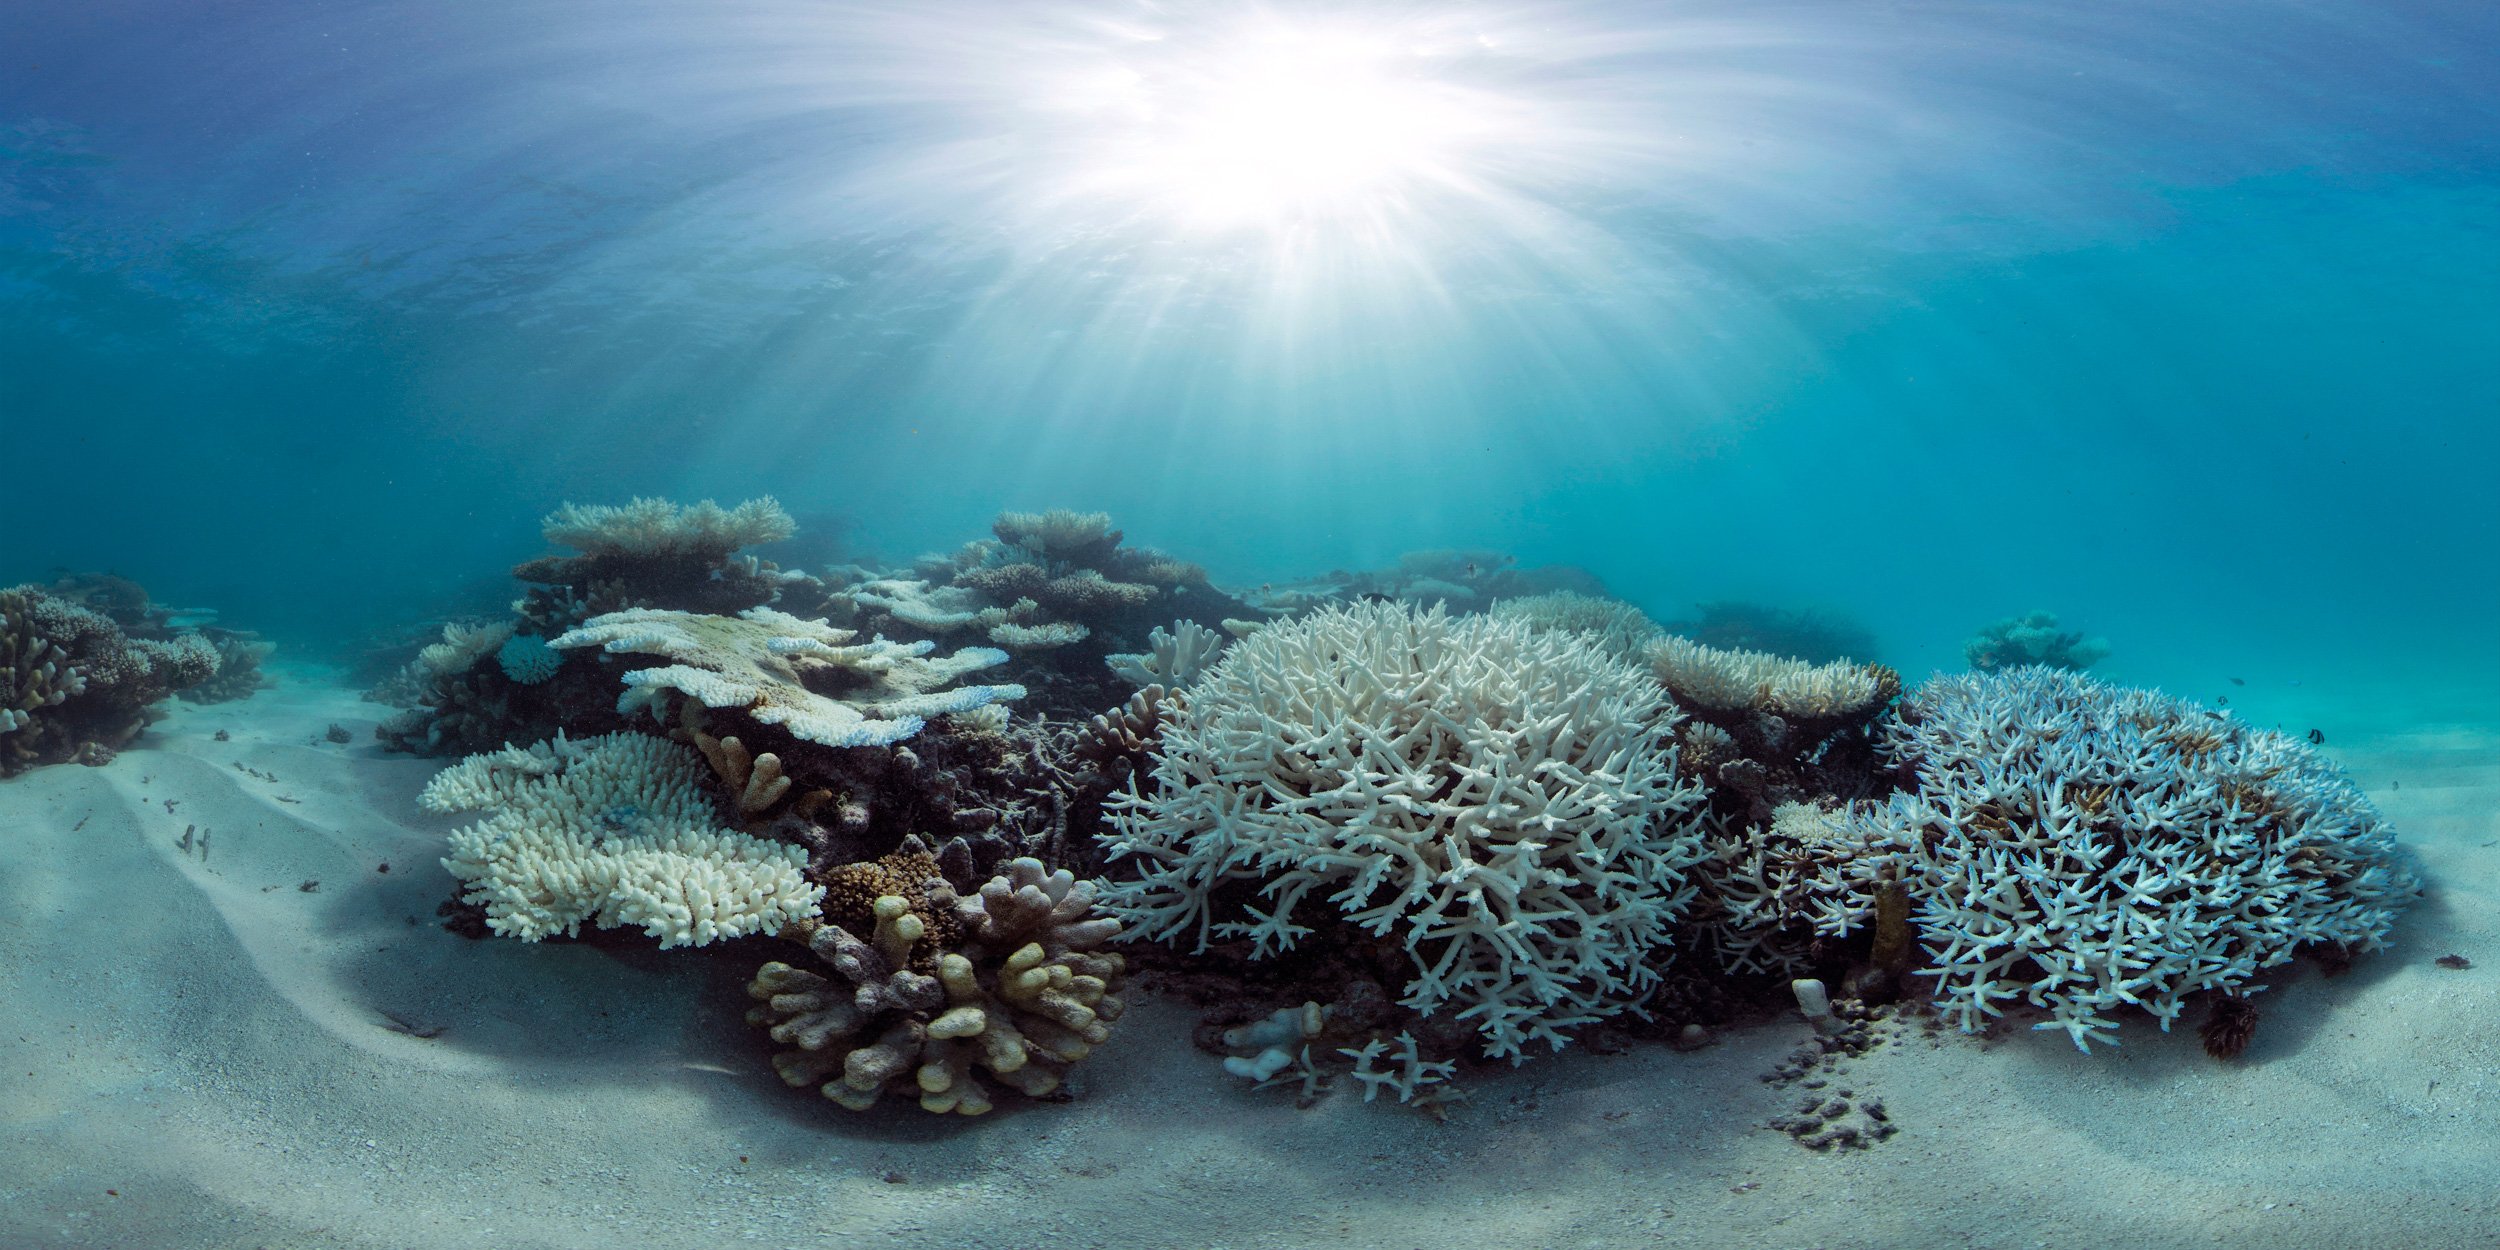 013-Panorama-of-Bleaching-in-the-Maldives-©-Underwater-Earth_ XL-Catlin-Seaview-Survey.jpg